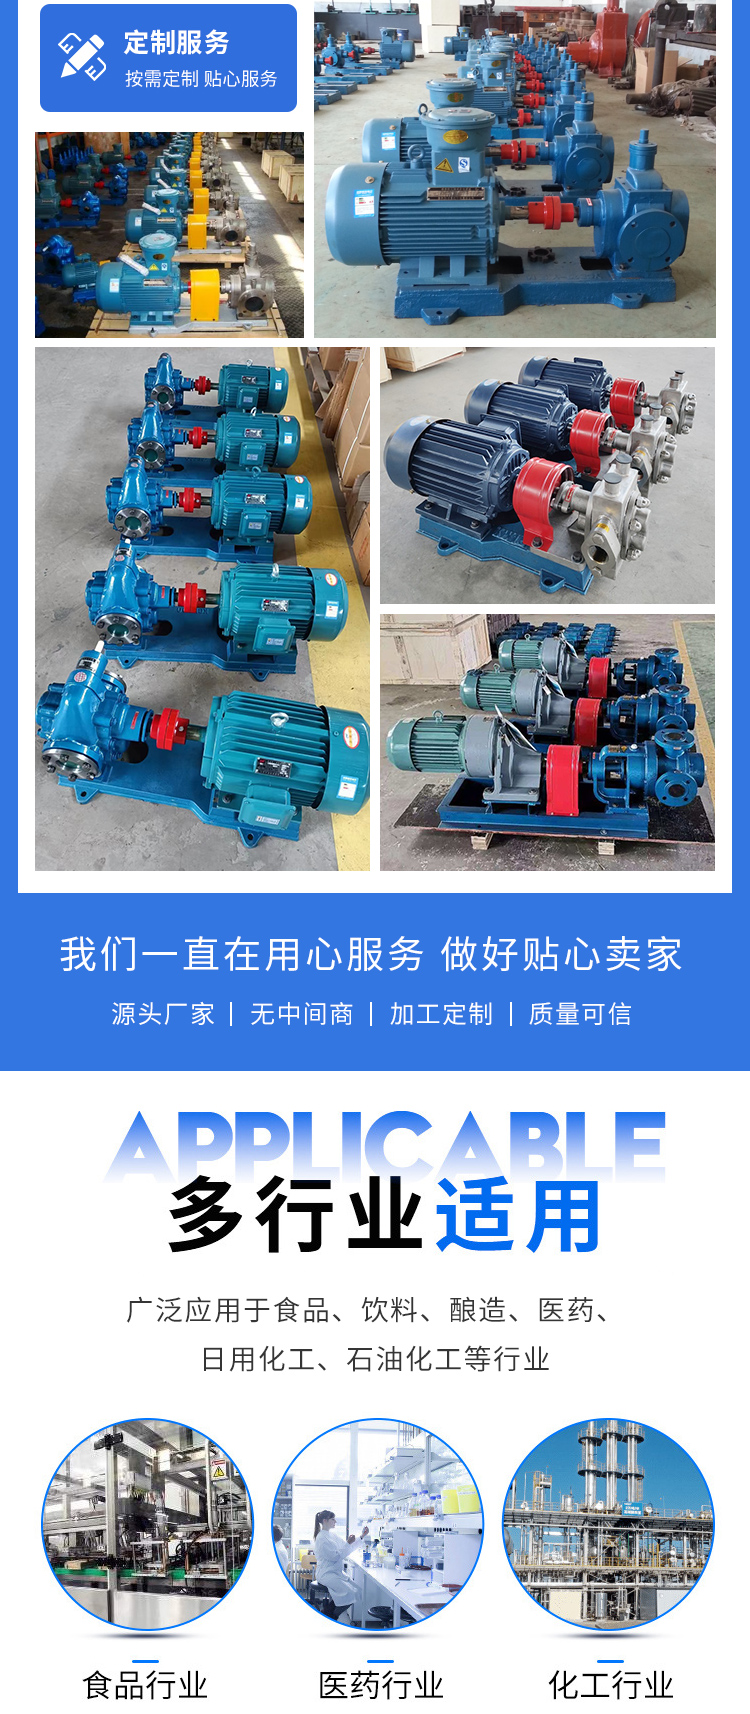 KCB stainless steel external lubrication gear pump 304/316 material food conveying pump runs smoothly